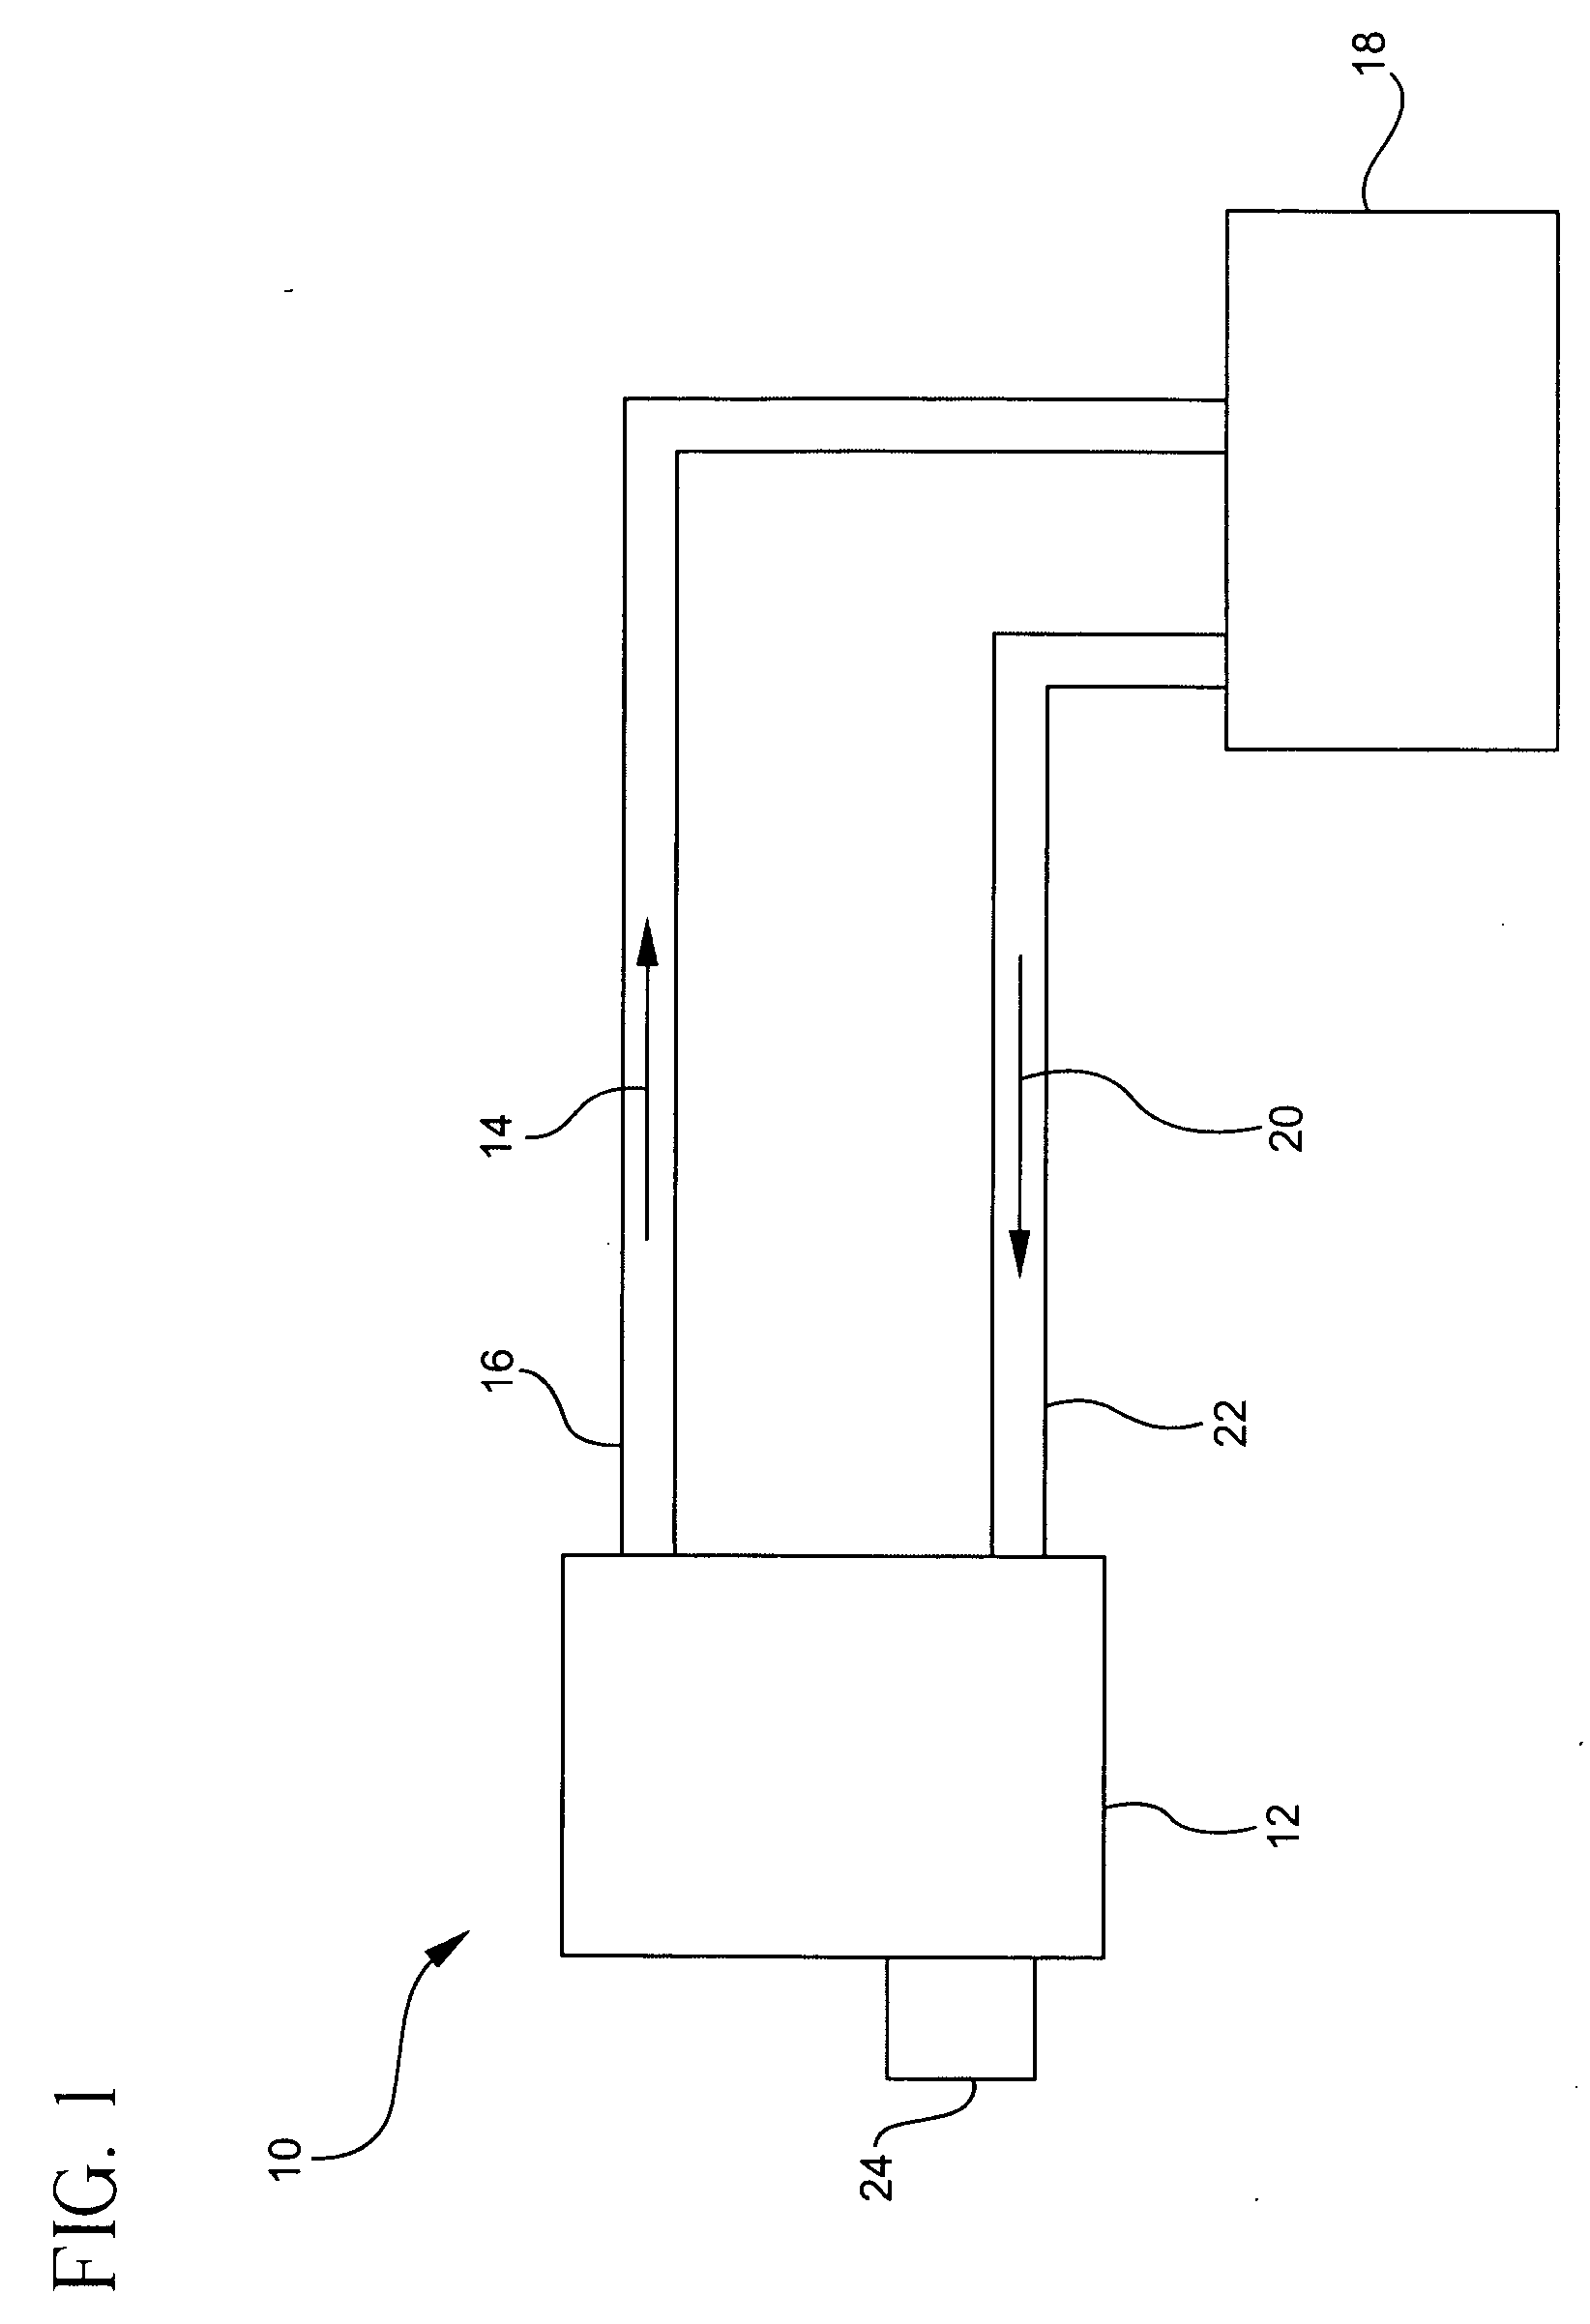 Thermal balance temperature control system